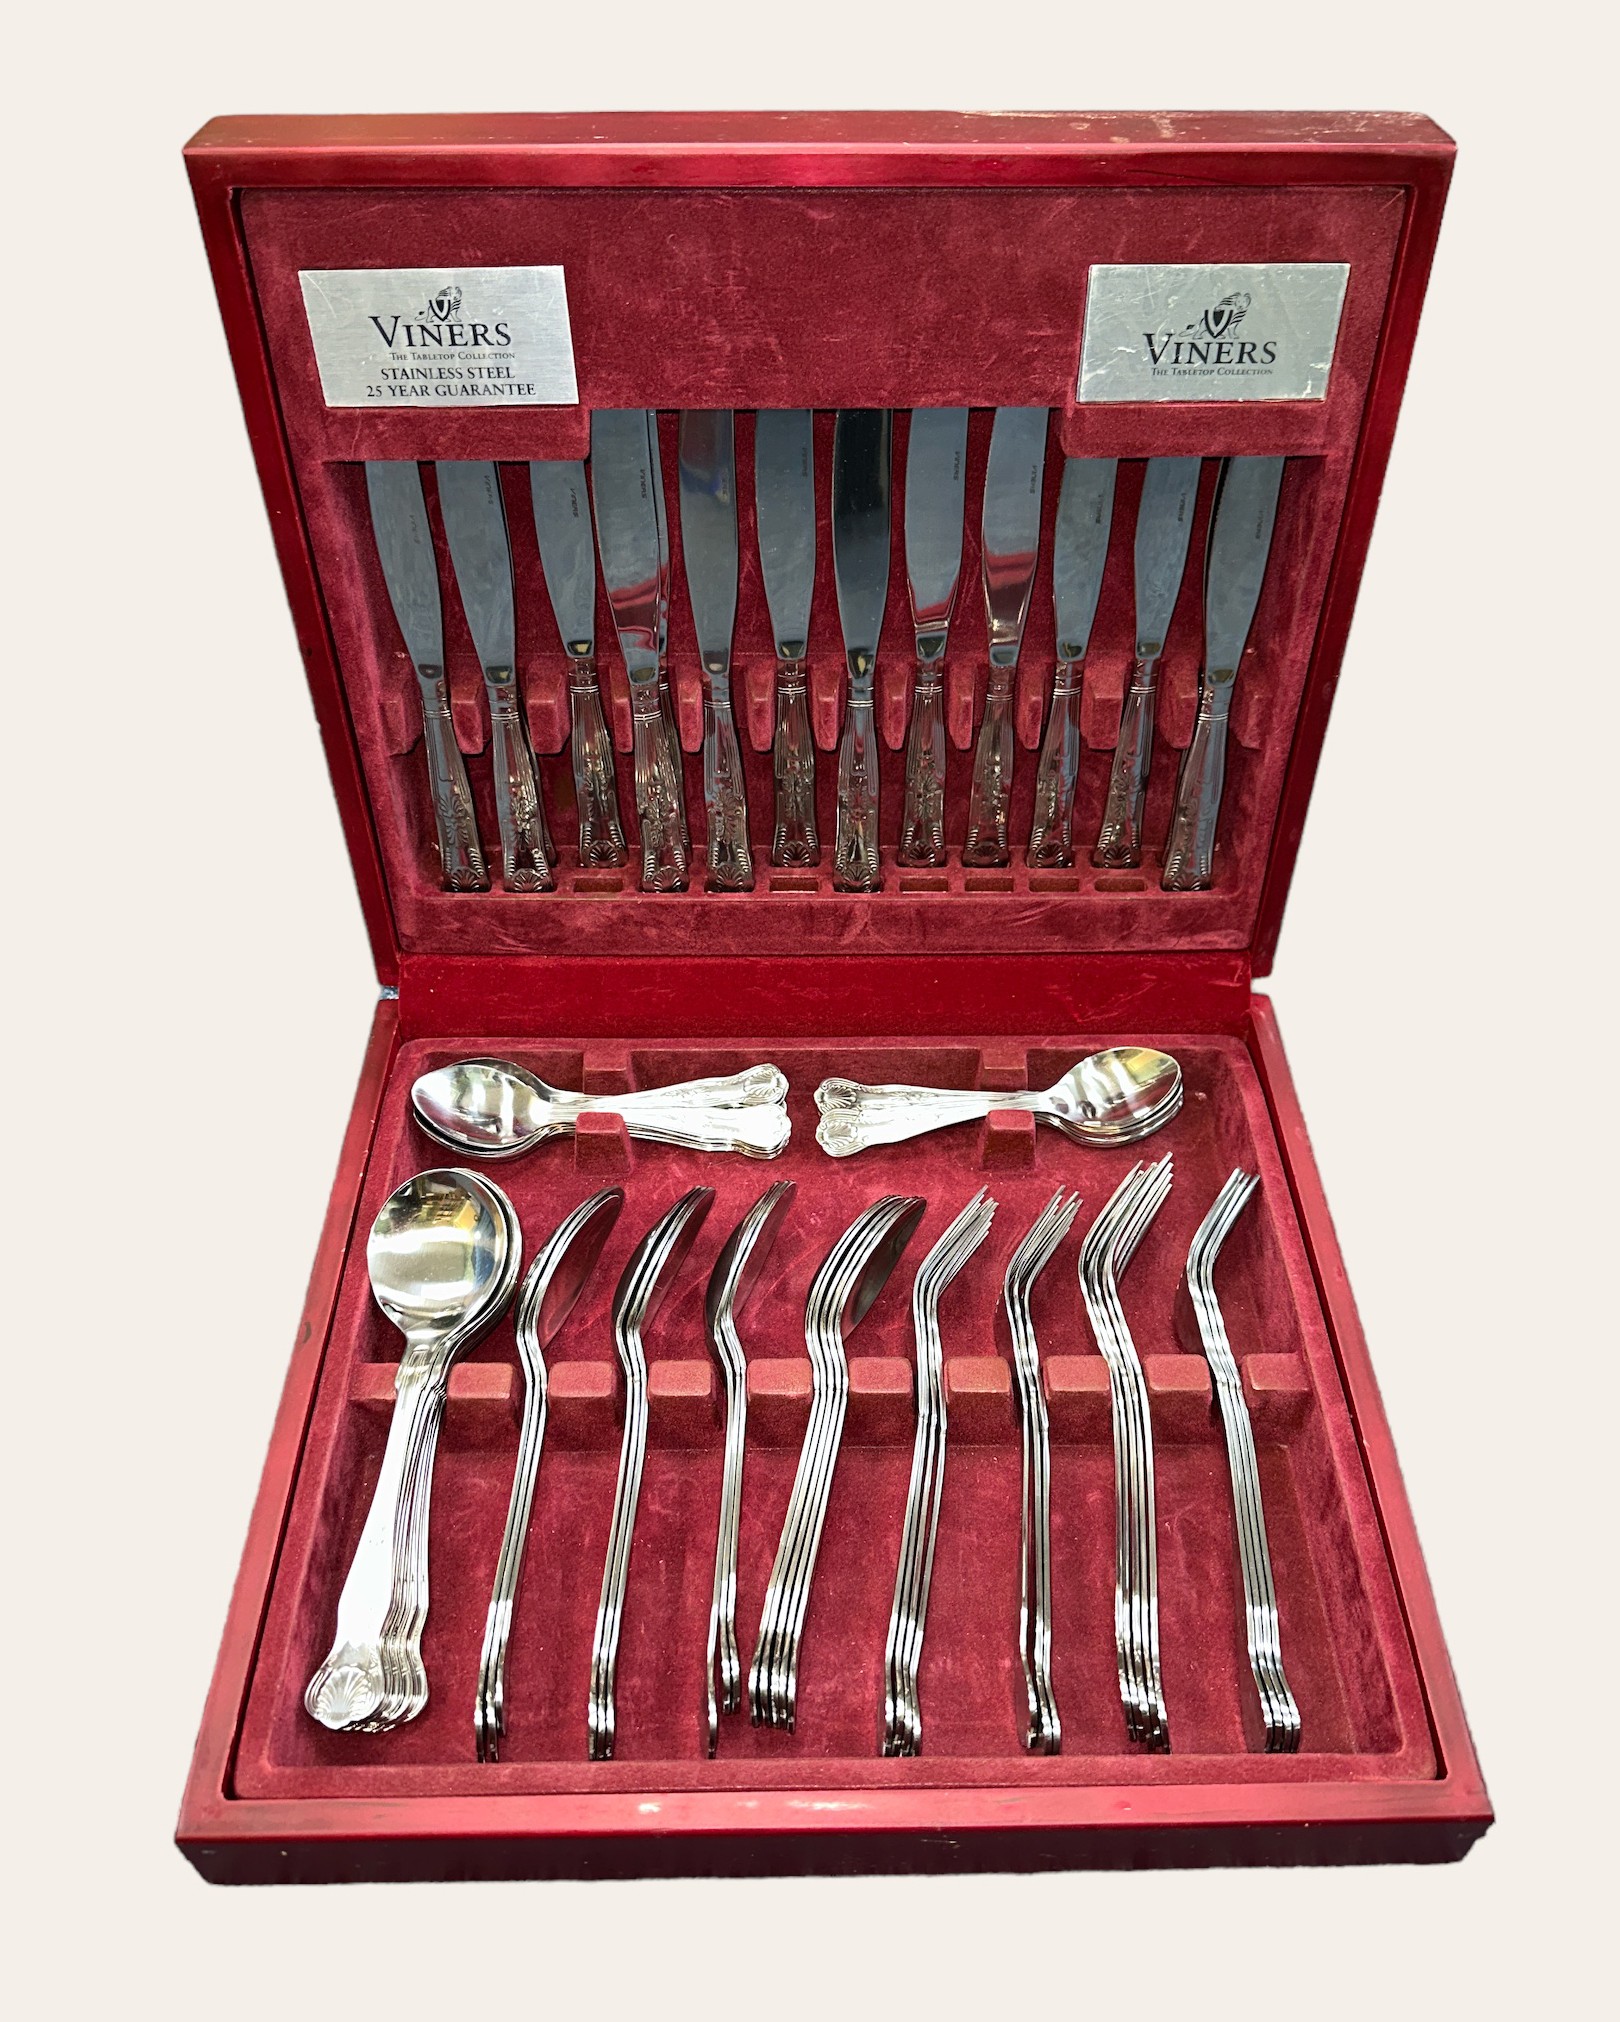 Viners, a Viners Westbury Canteen Cutlery. Stainless Steel, The Tabletop Collection. 70 pieces in